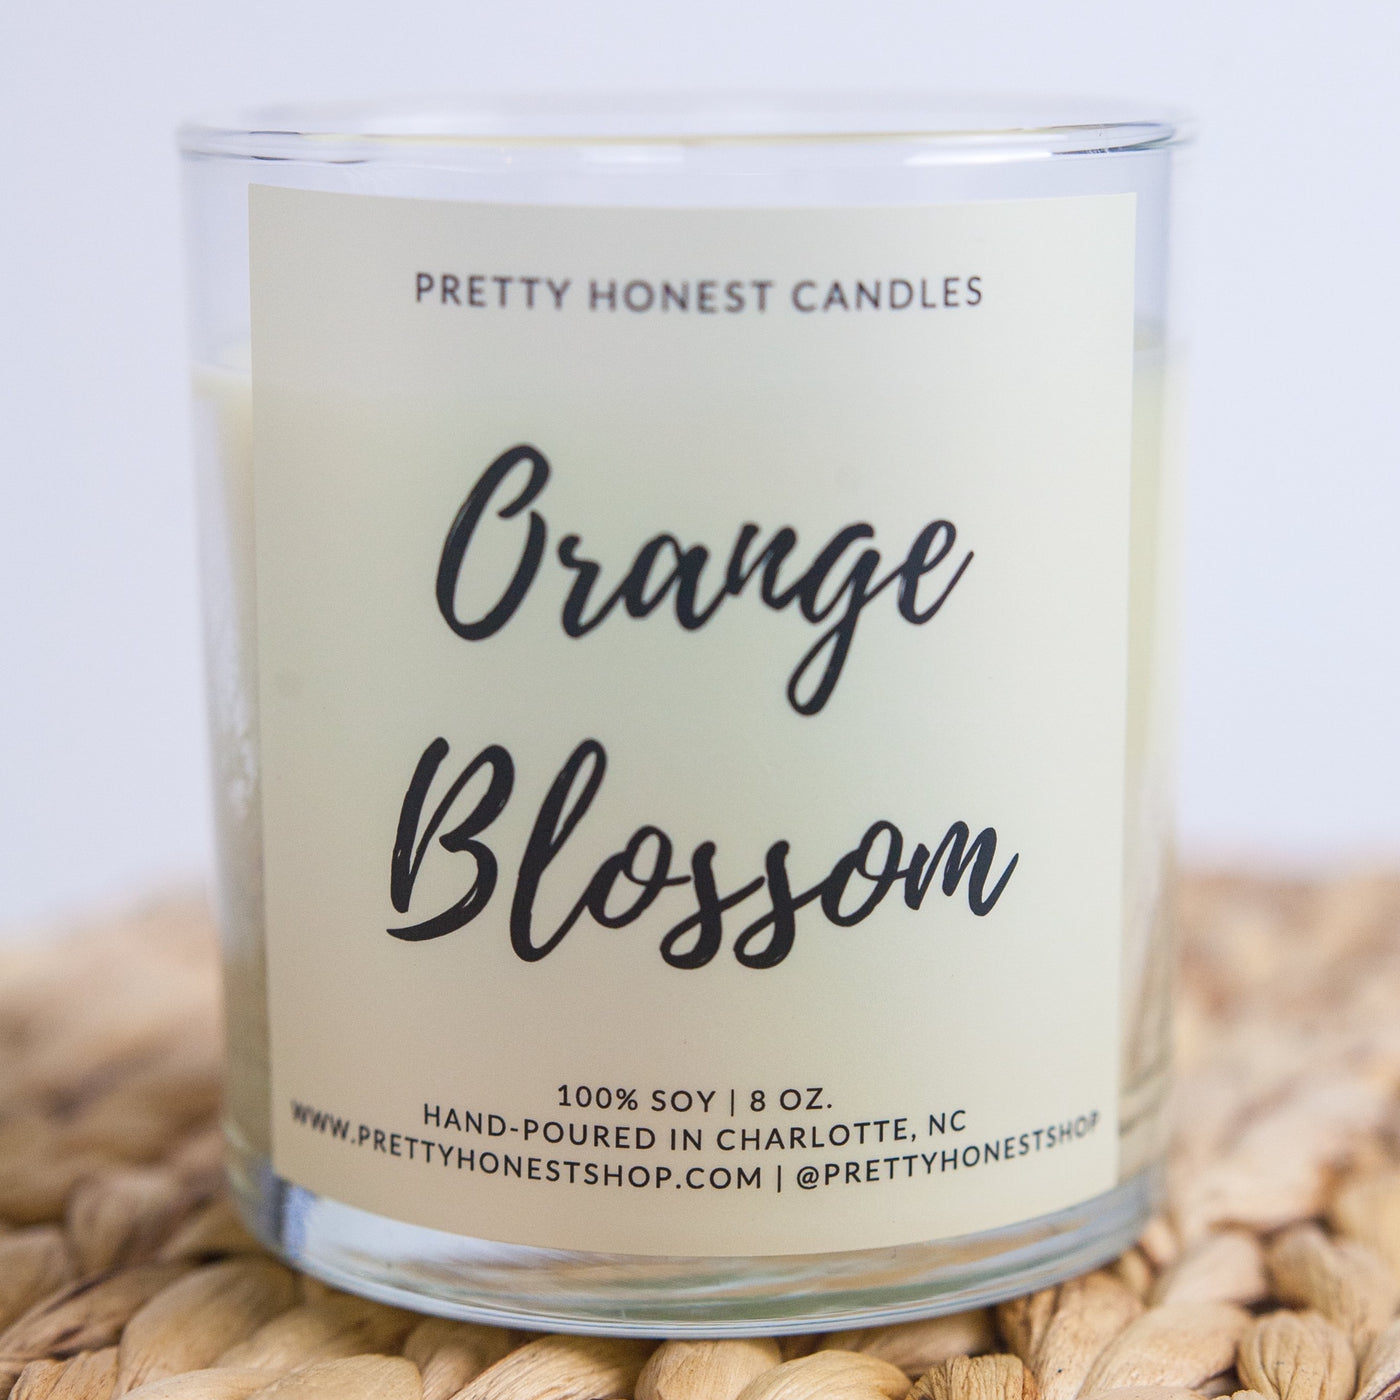 Orange Blossom Soy Candle - Pretty Honest Candles